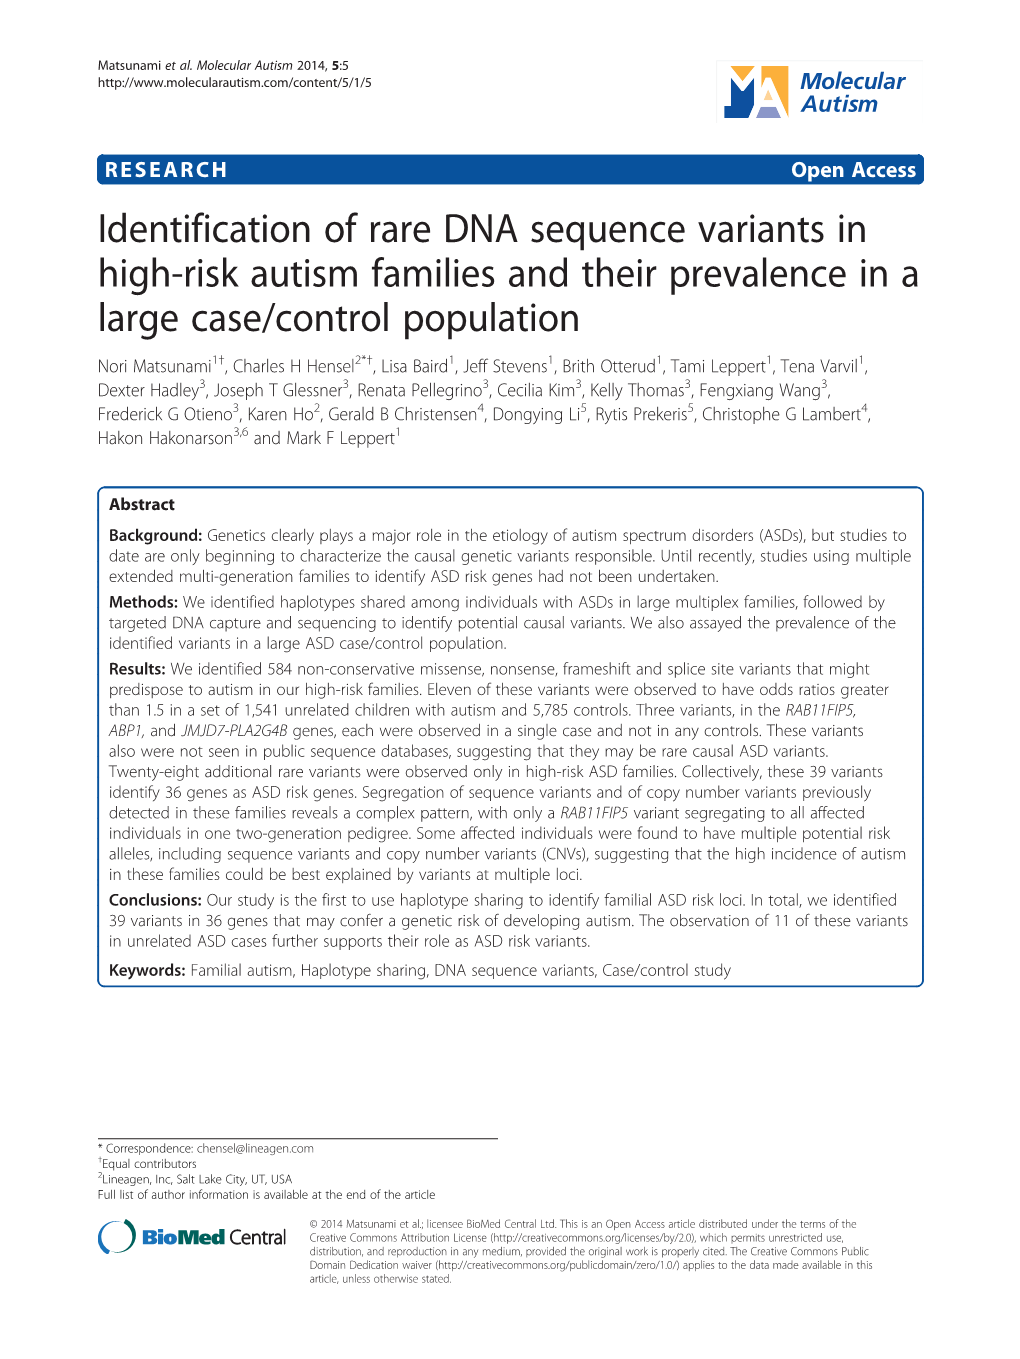 Identification of Rare DNA Sequence Variants in High-Risk Autism Families